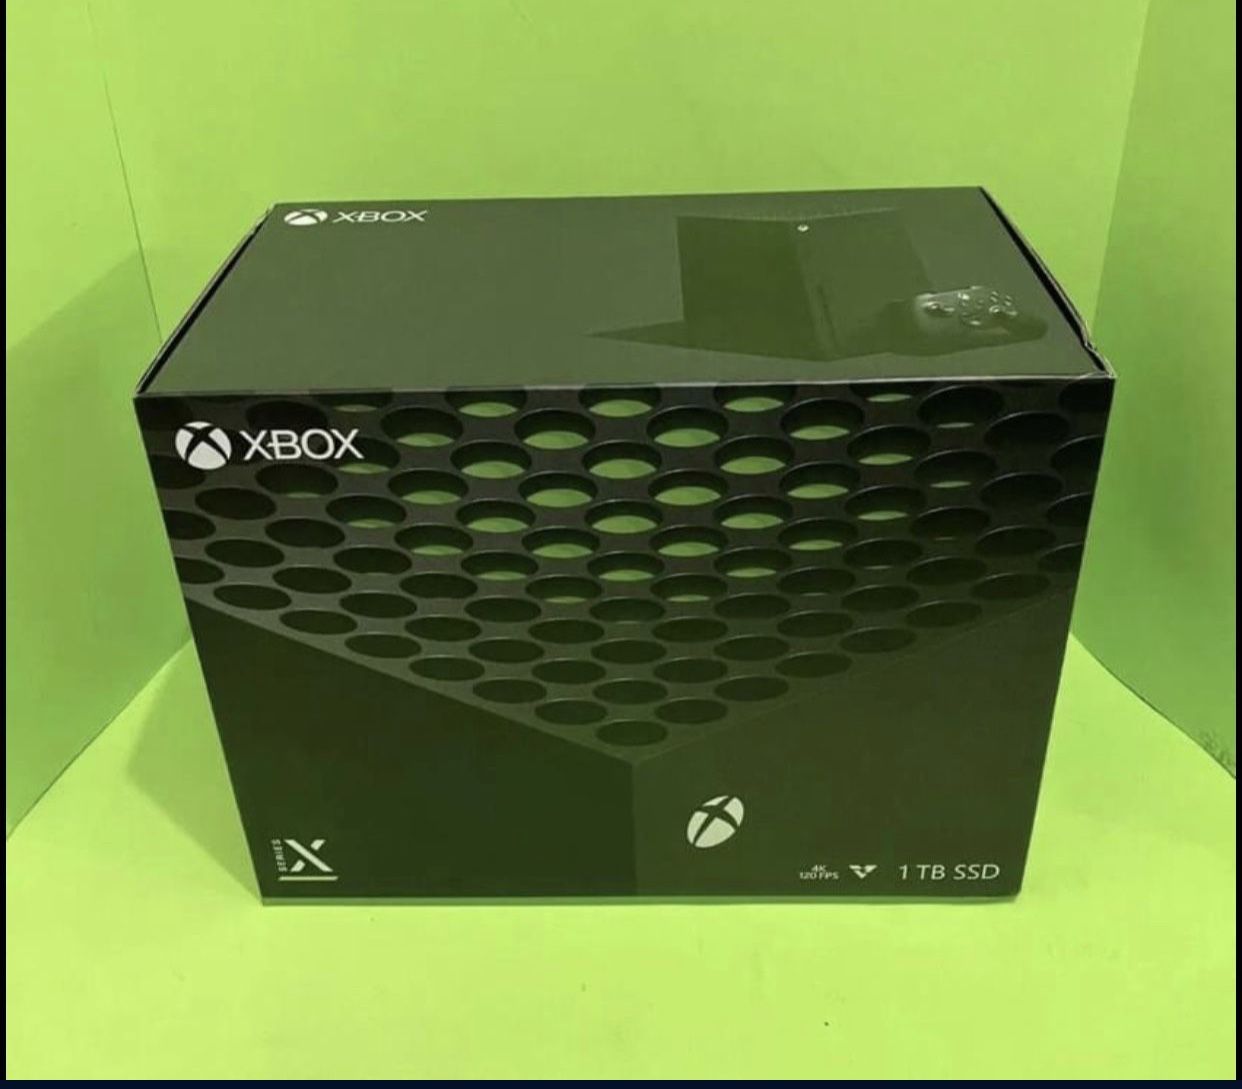 *PRICE IS FIRM* Brand New XBox Series X Factory Sealed